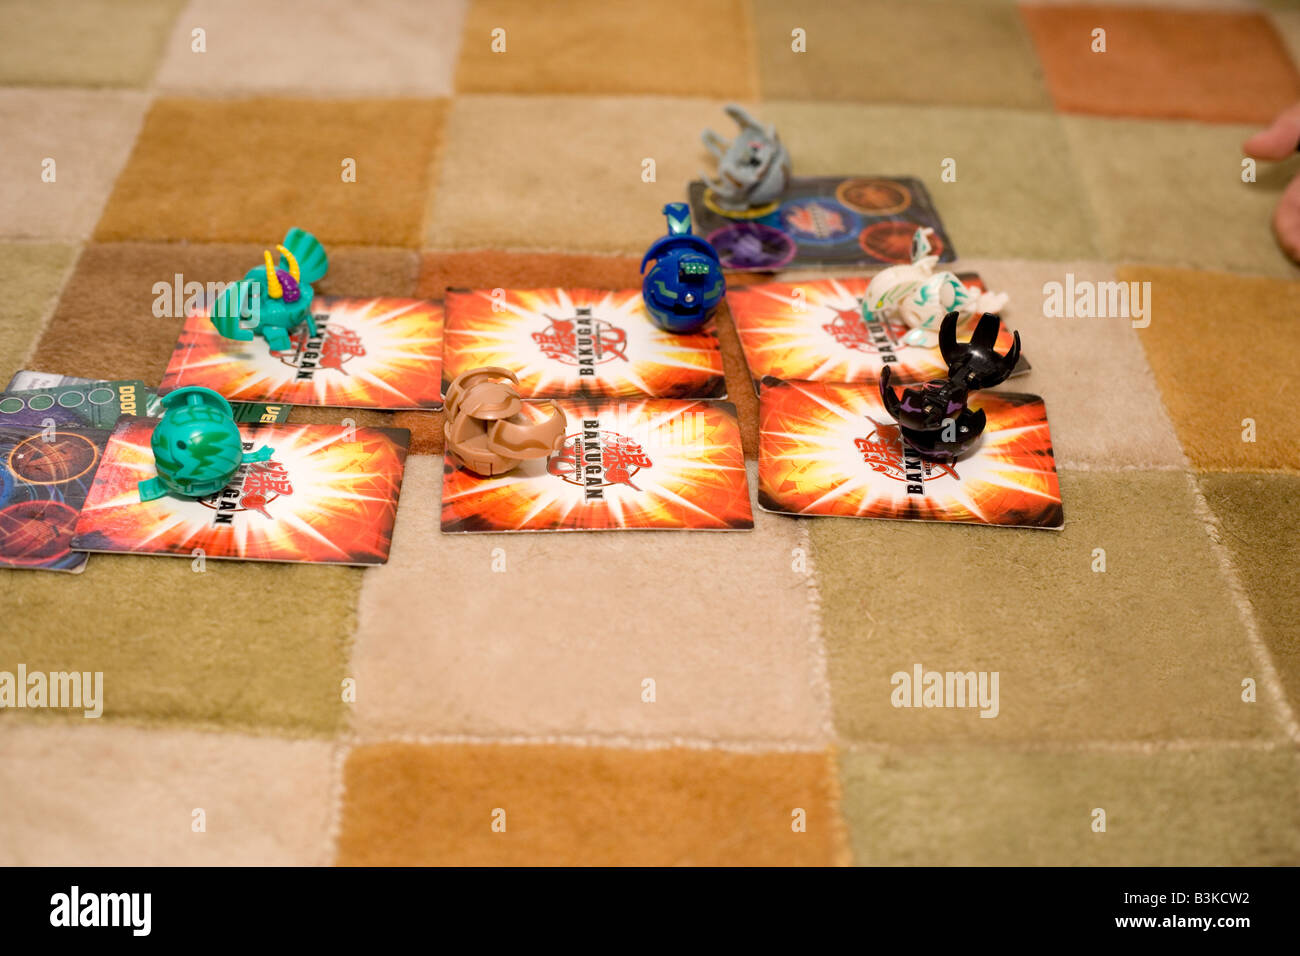 close up of Bakugan toys on the floor Stock Photo